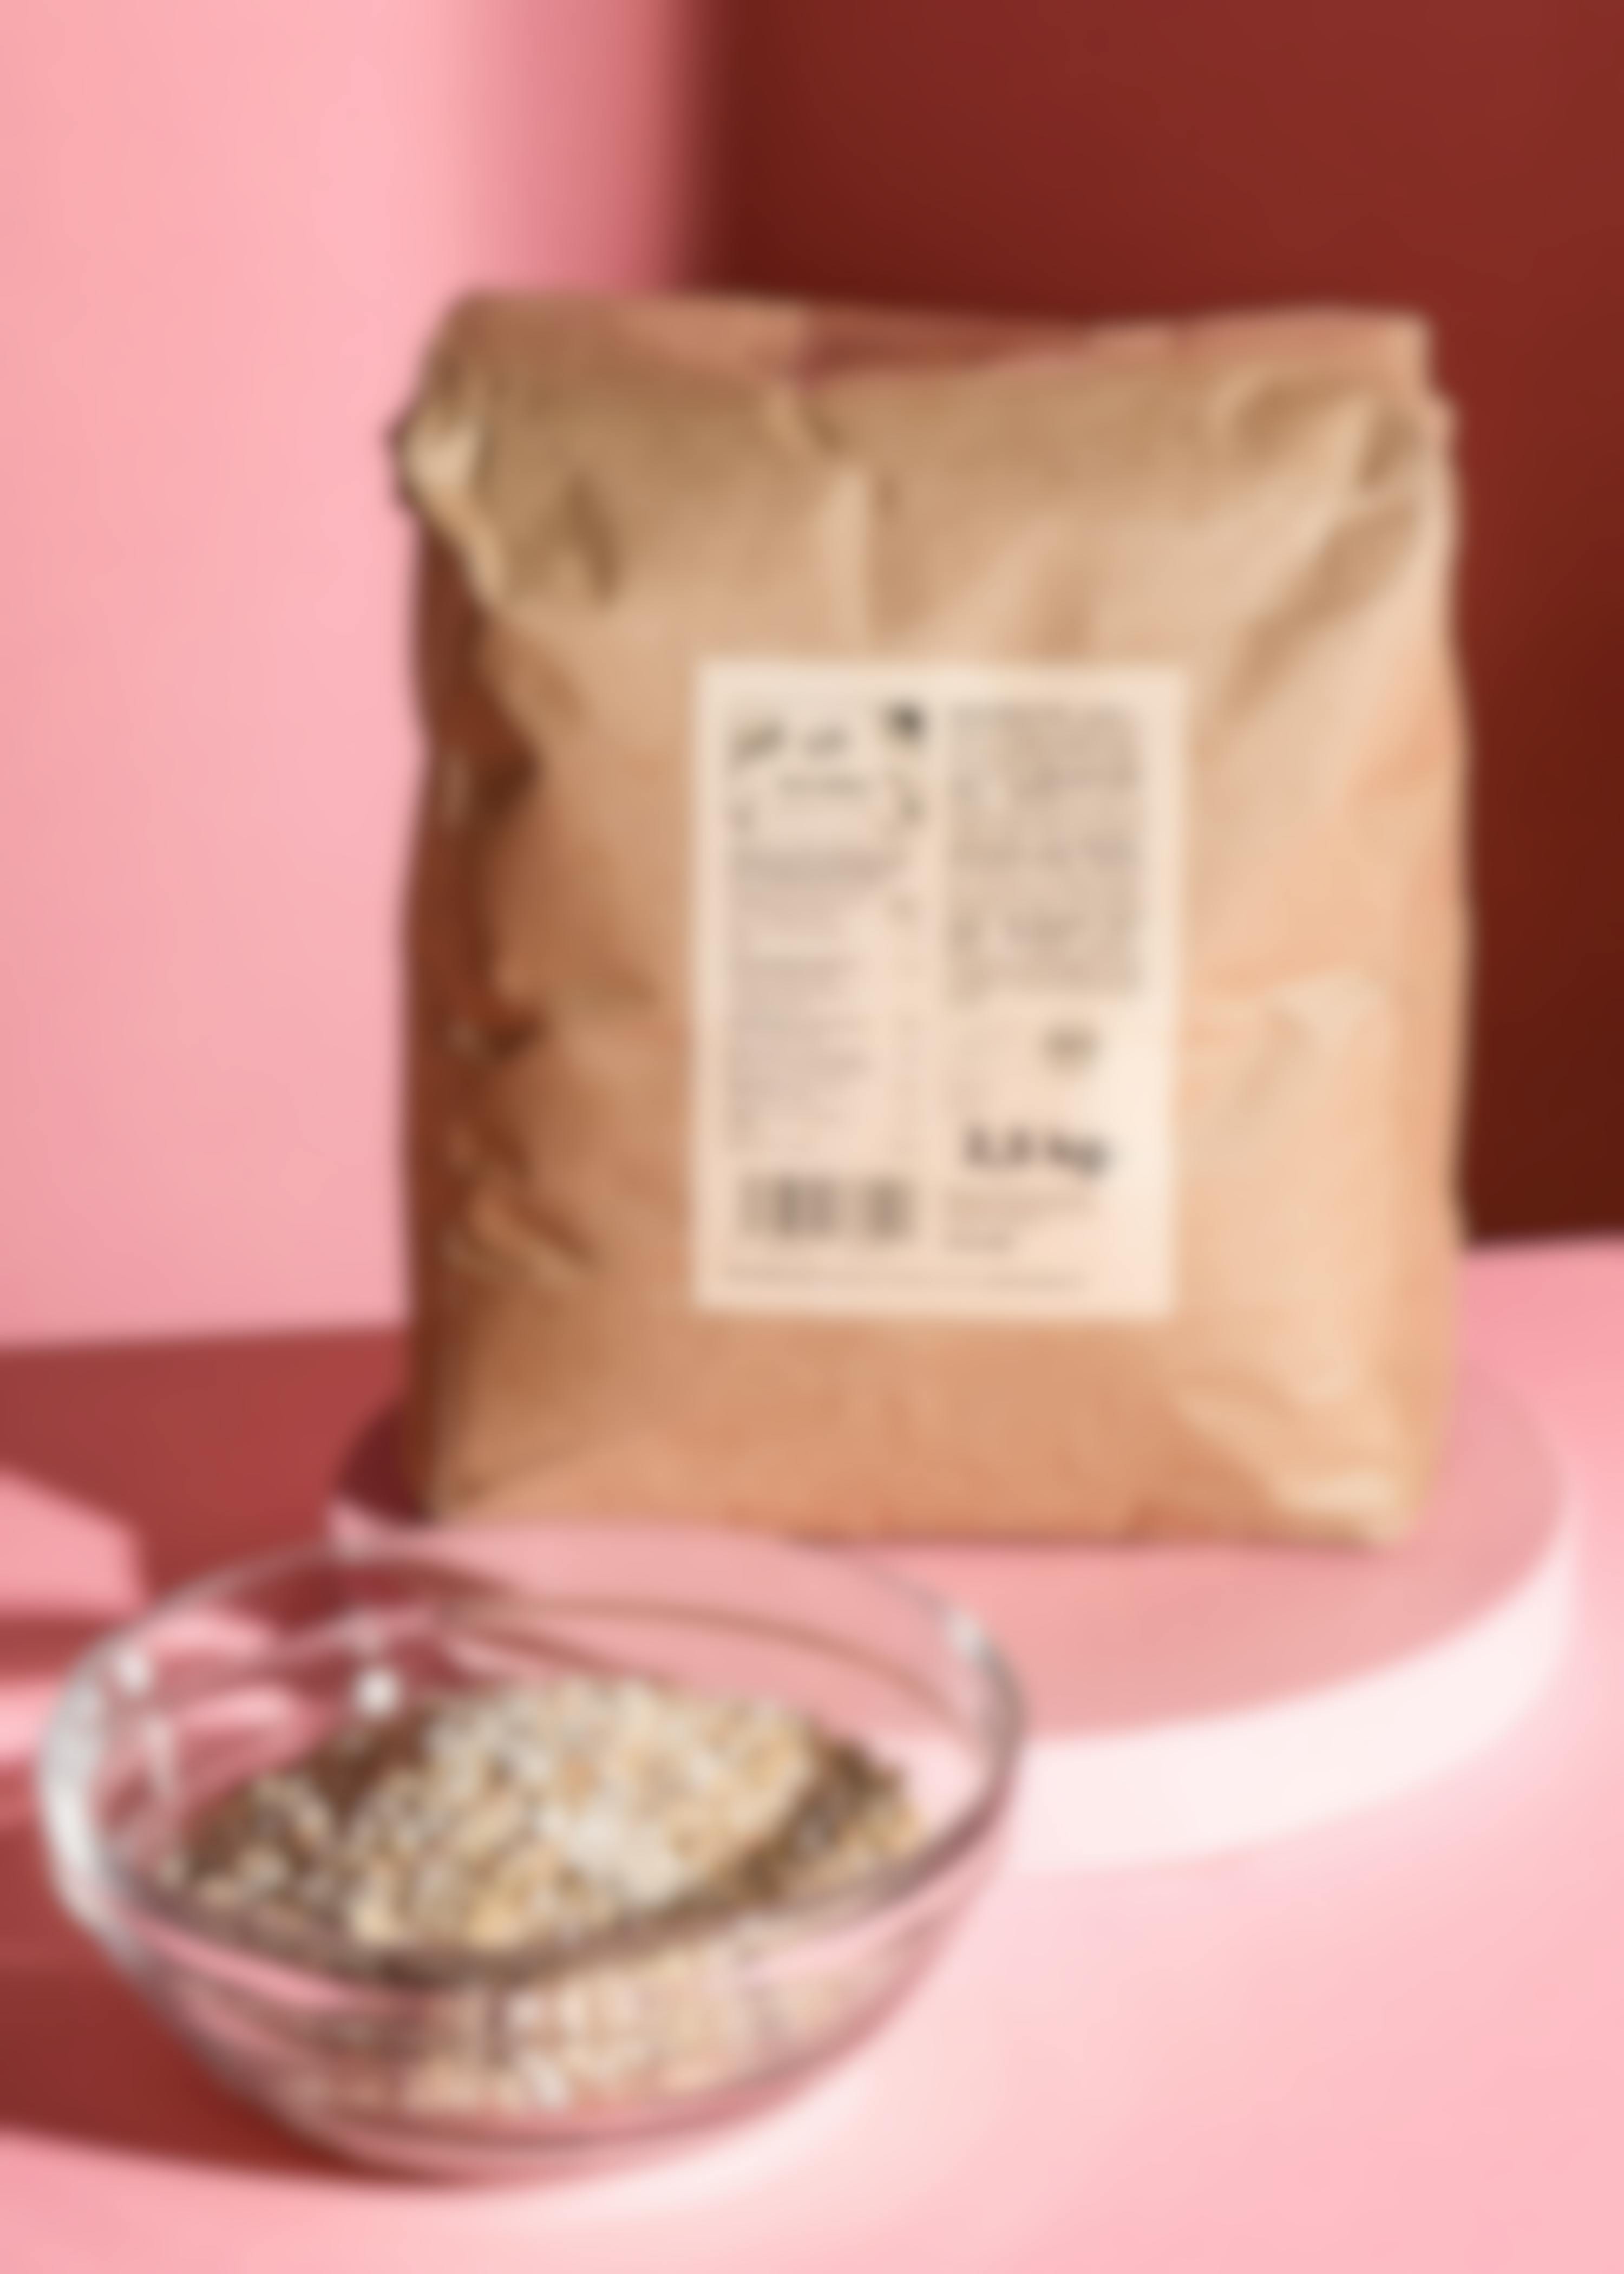 Organic sprouted muesli 2.5kg